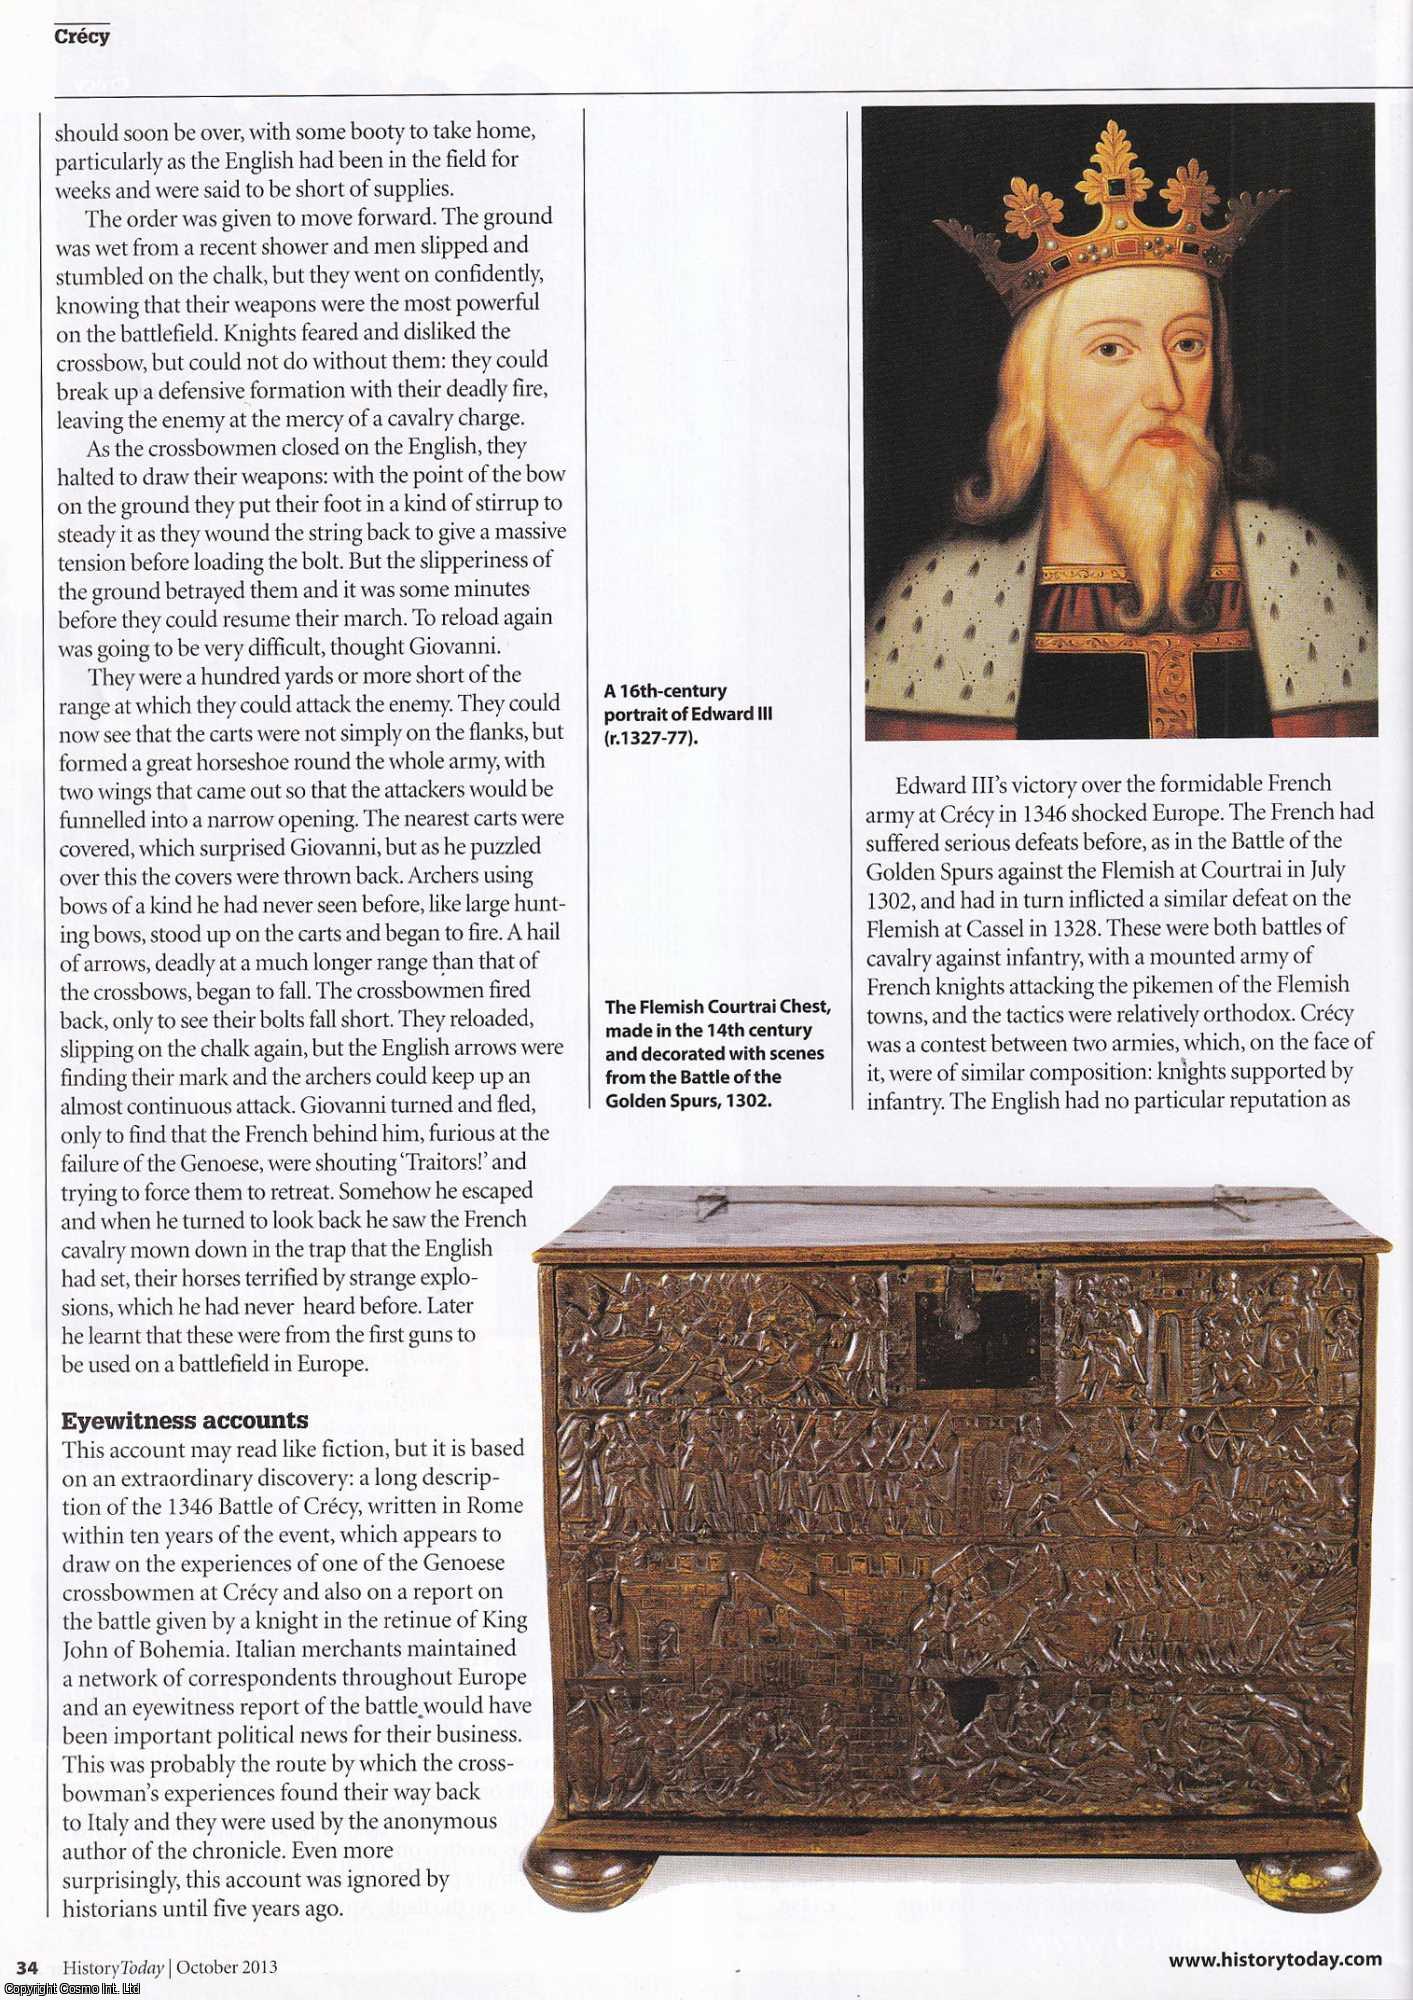 Richard Barber - Edward III and the Battle of Crecy. An original article from History Today magazine, 2013.